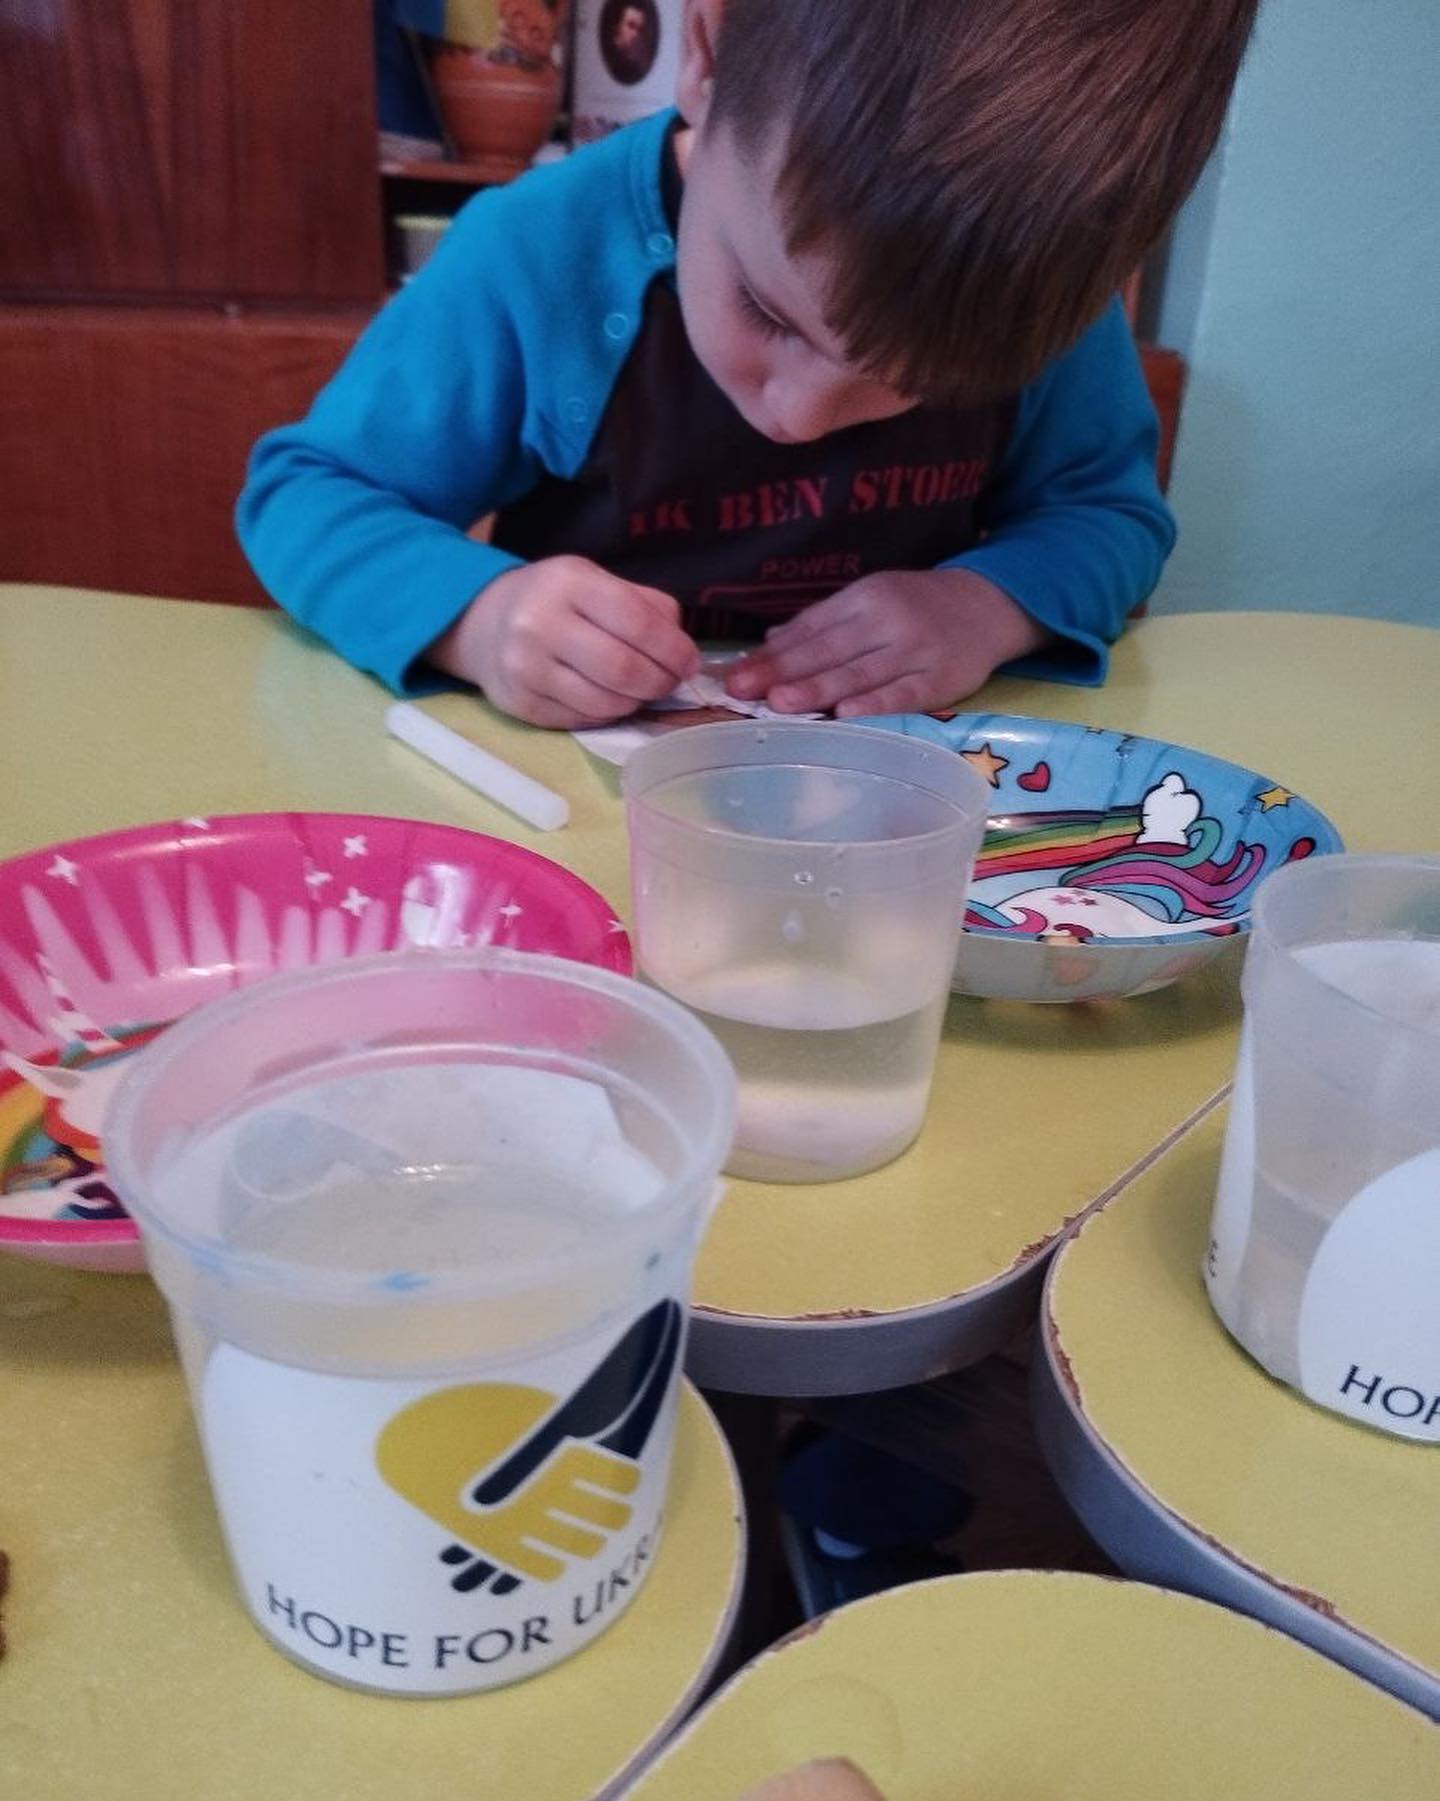 A boy is sitting at a table with cups of water.